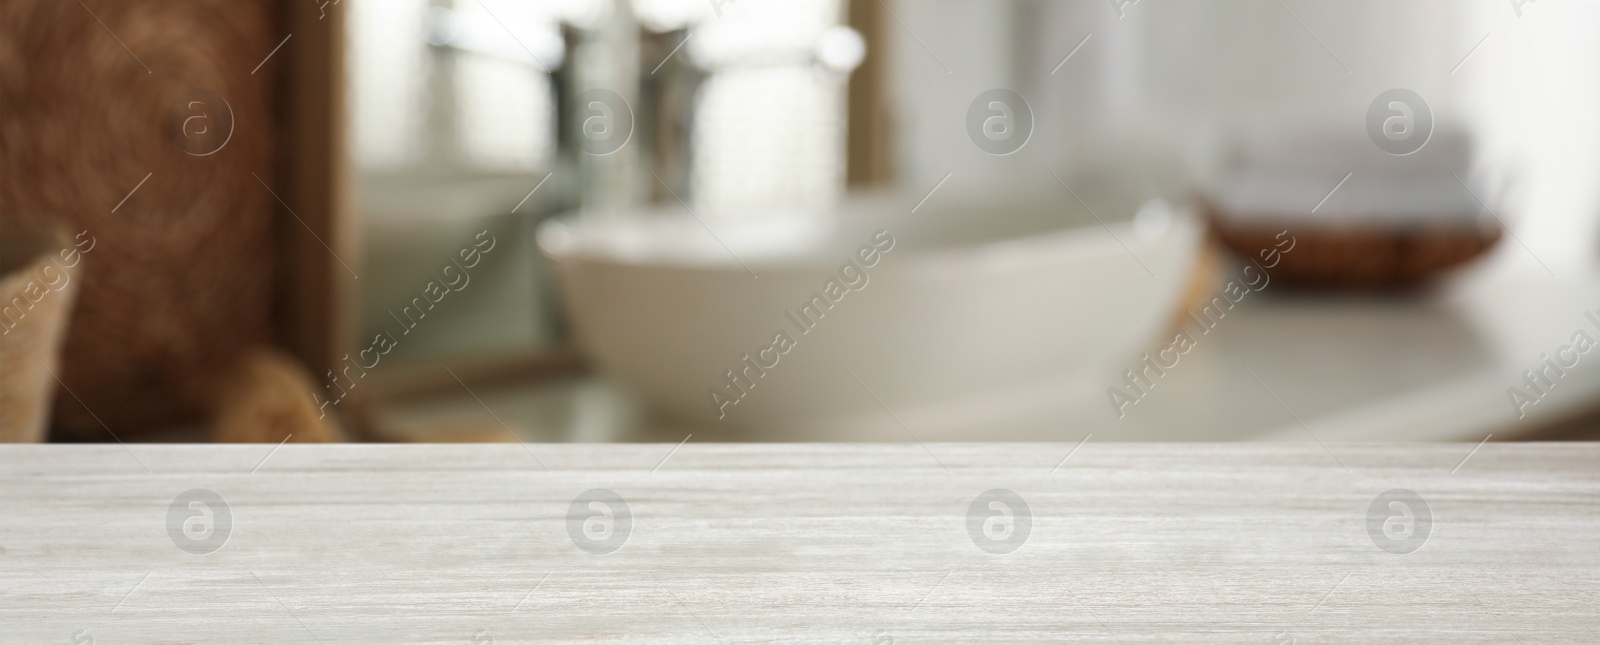 Image of Empty wooden table and blurred view of stylish bathroom interior